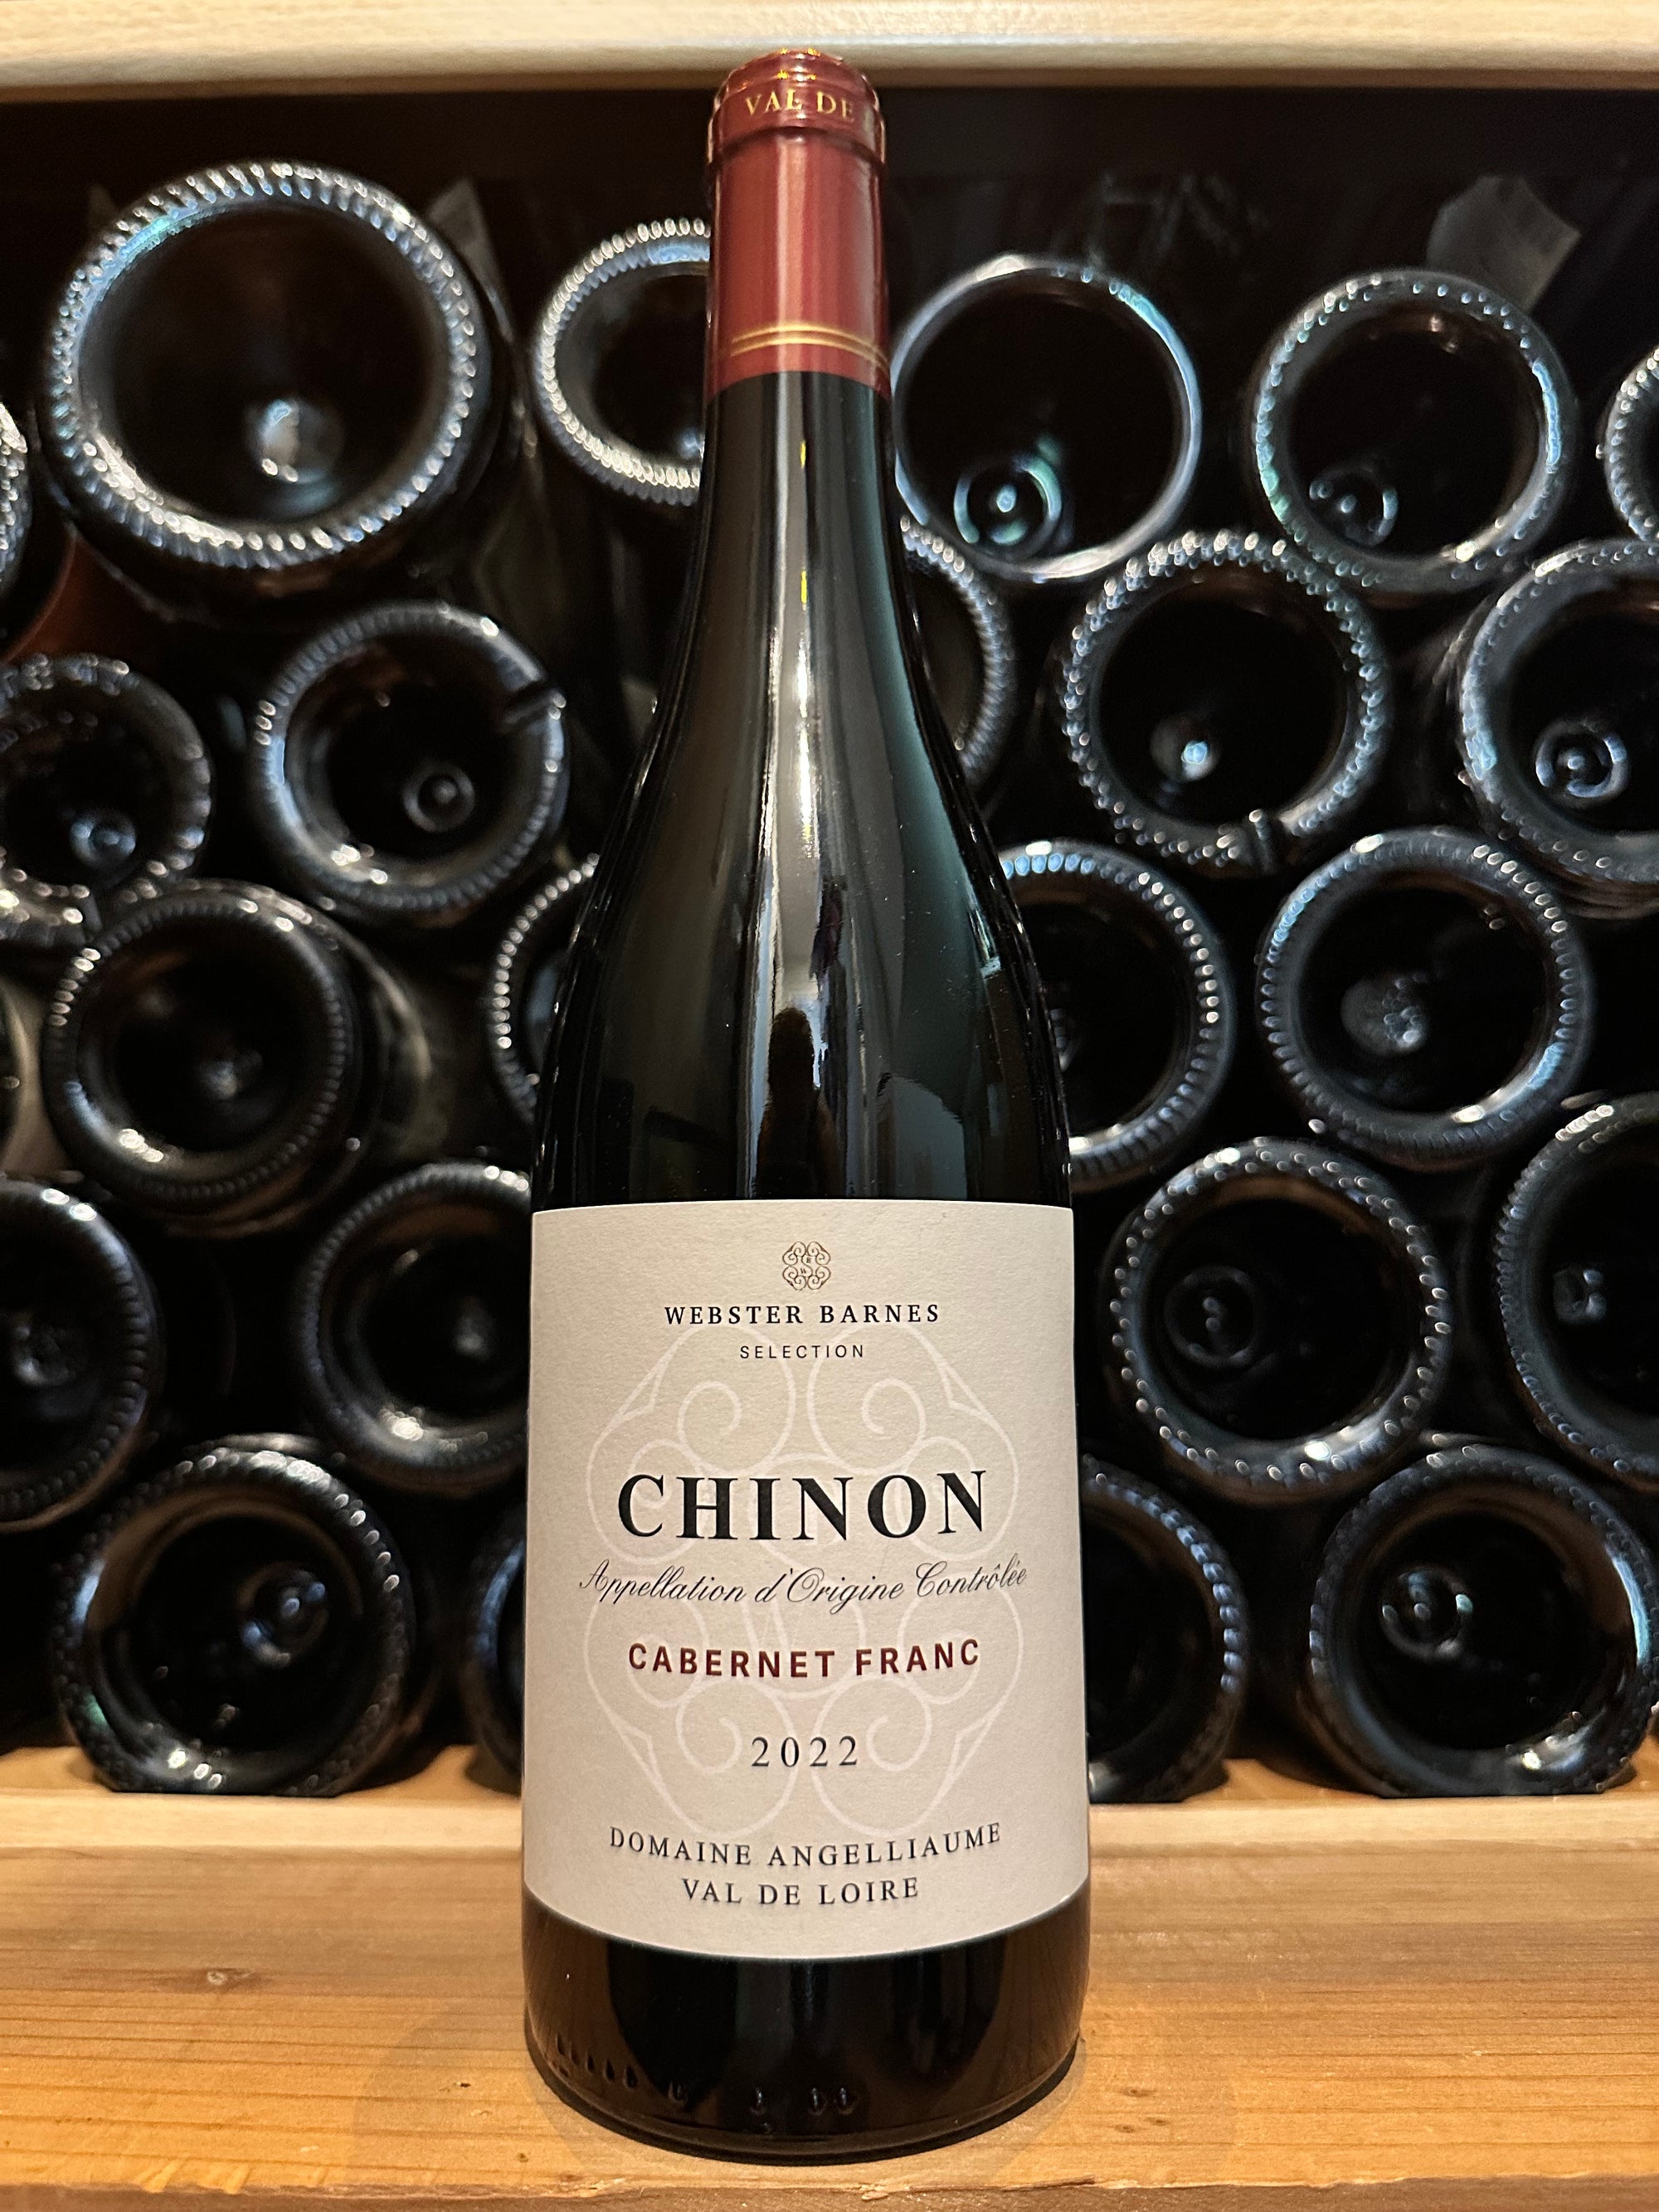 Webster Barnes Selections Chinon Cabernet Franc 2022